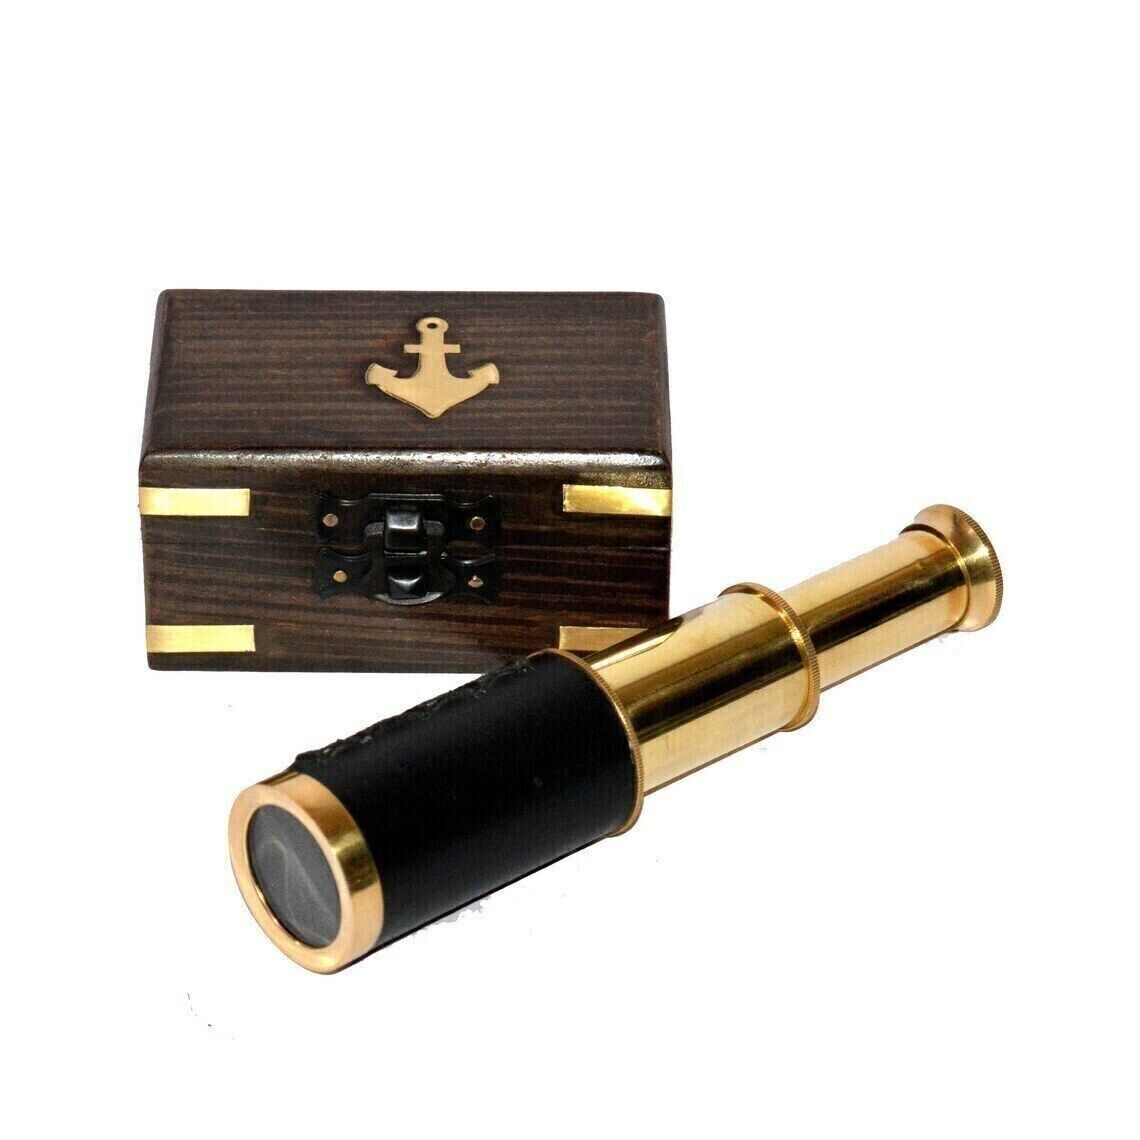 Vintage Brass Telescope Pirate Spyglass Black Leather With Wooden Box Gift Item